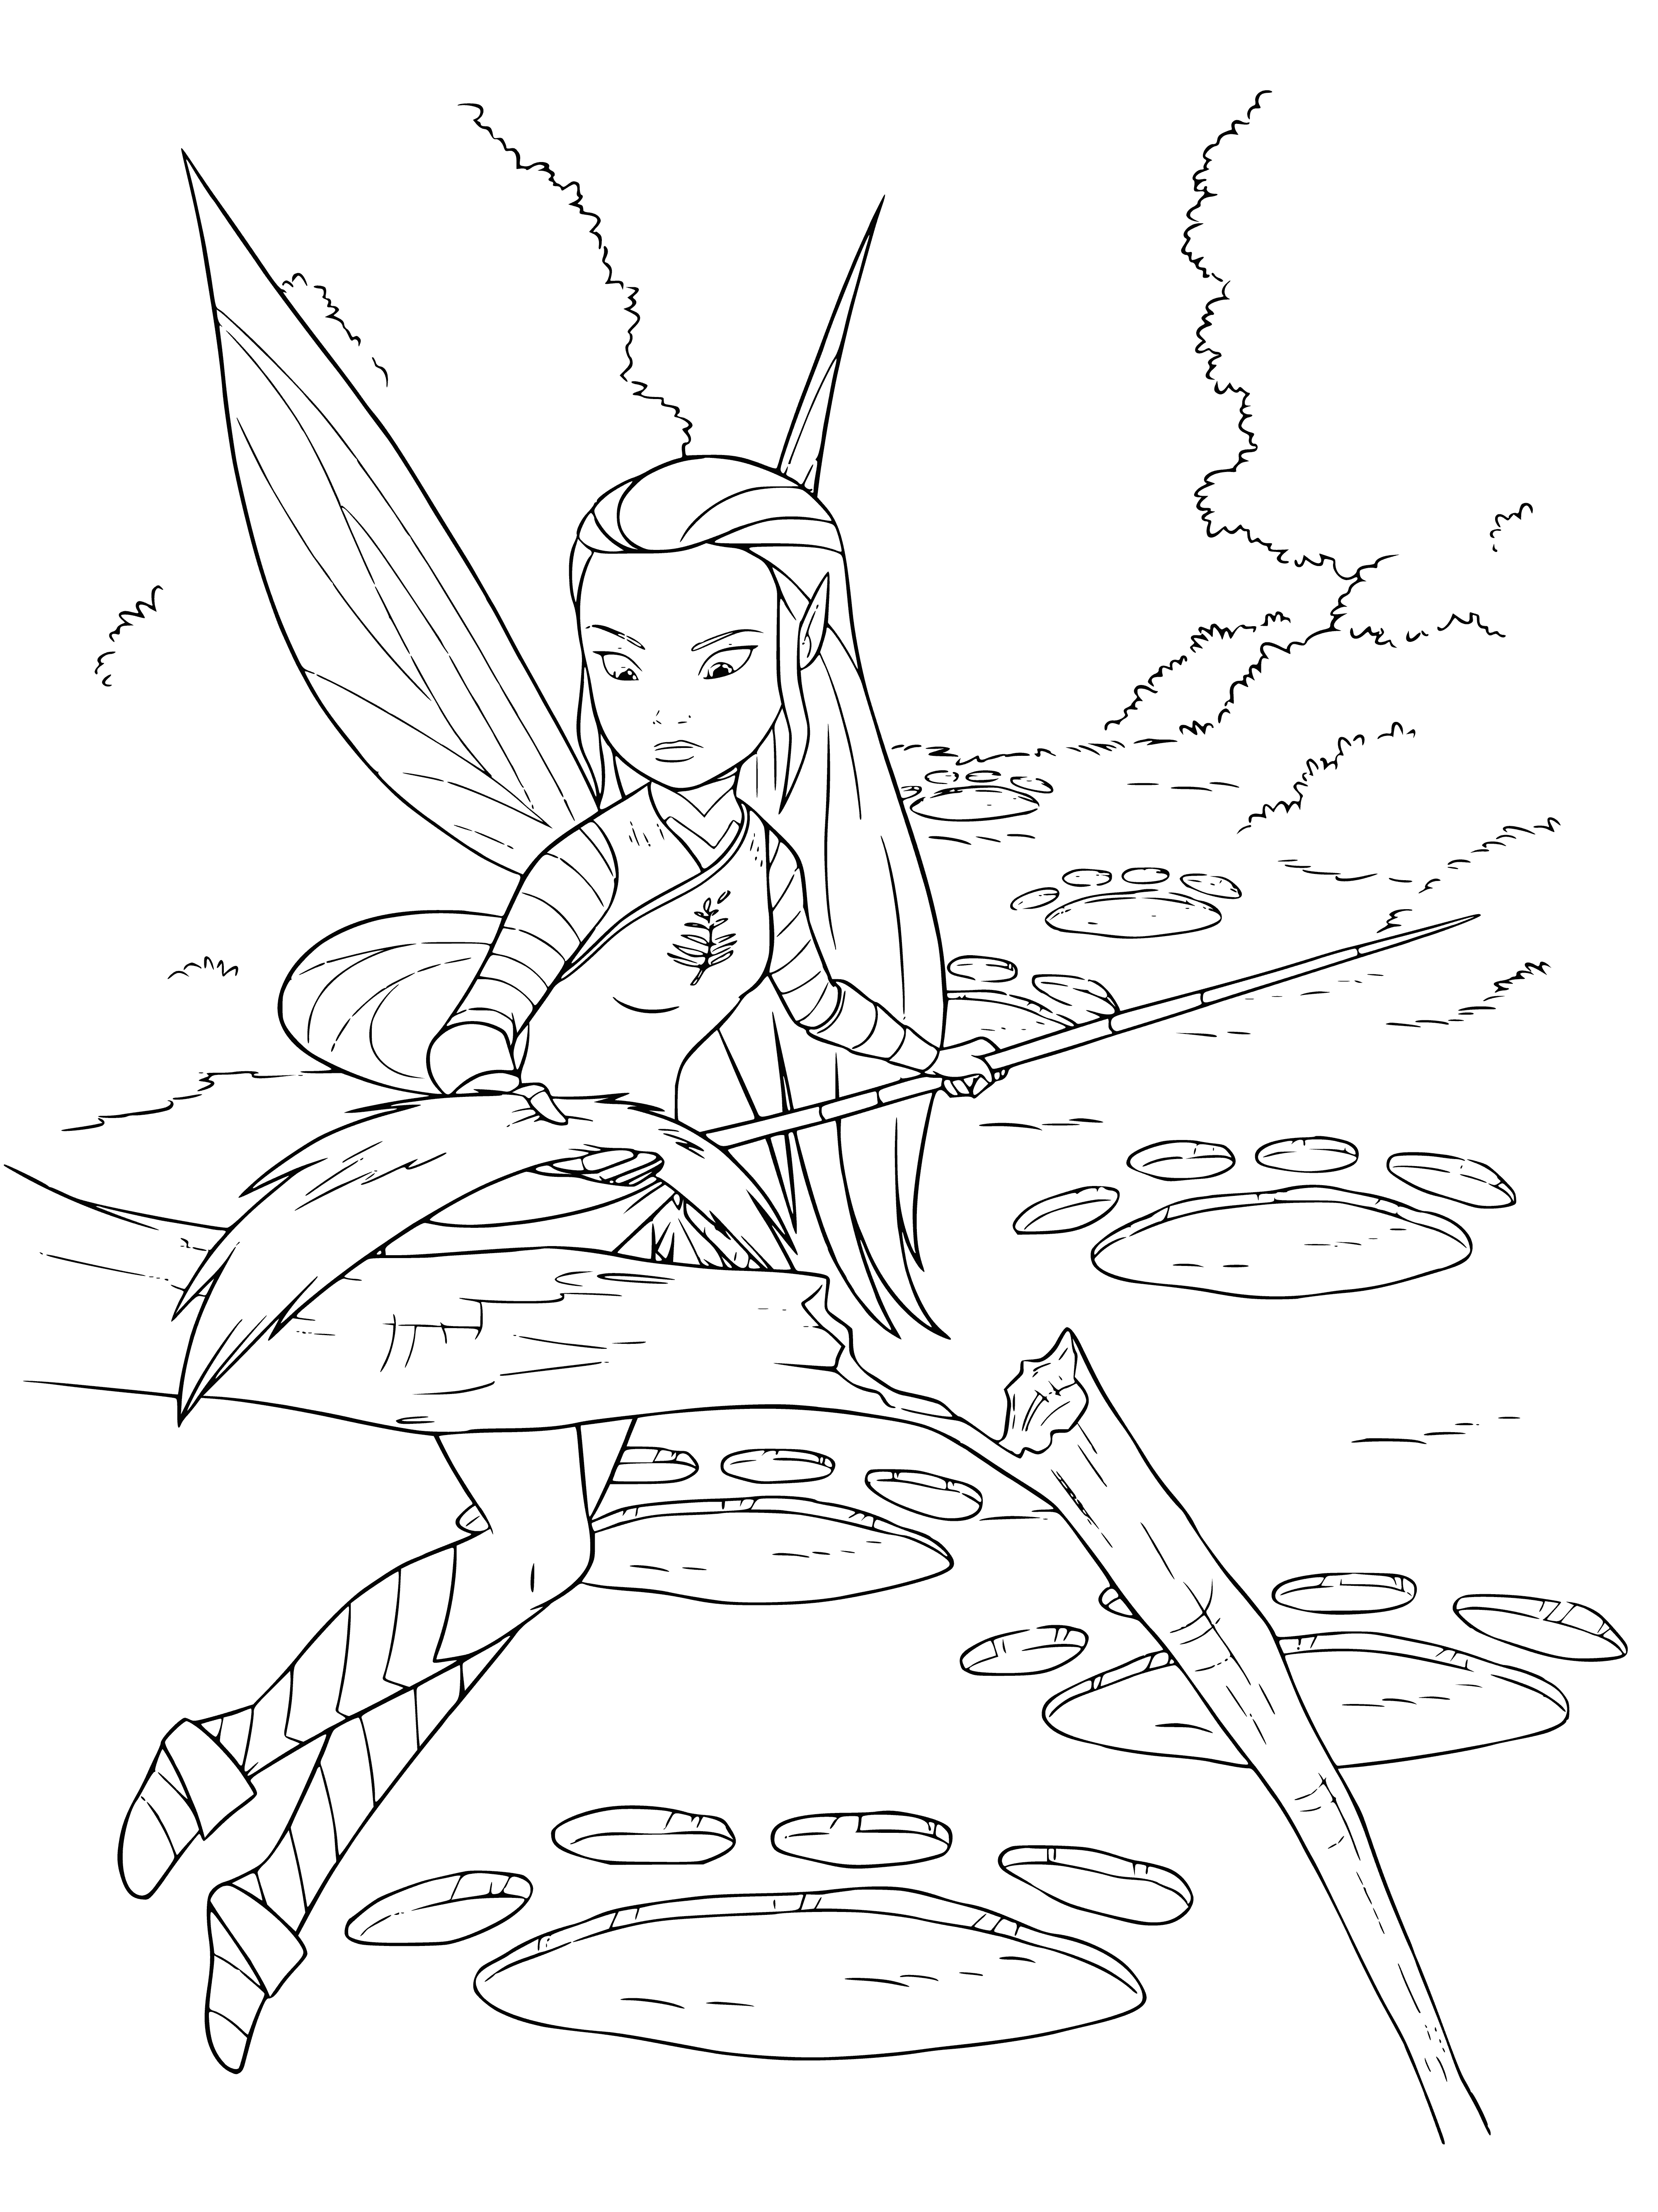 coloring page: Fierce hunter with horns pursuing large, furry creature with long snout; creature doesn't seem keen to be caught!